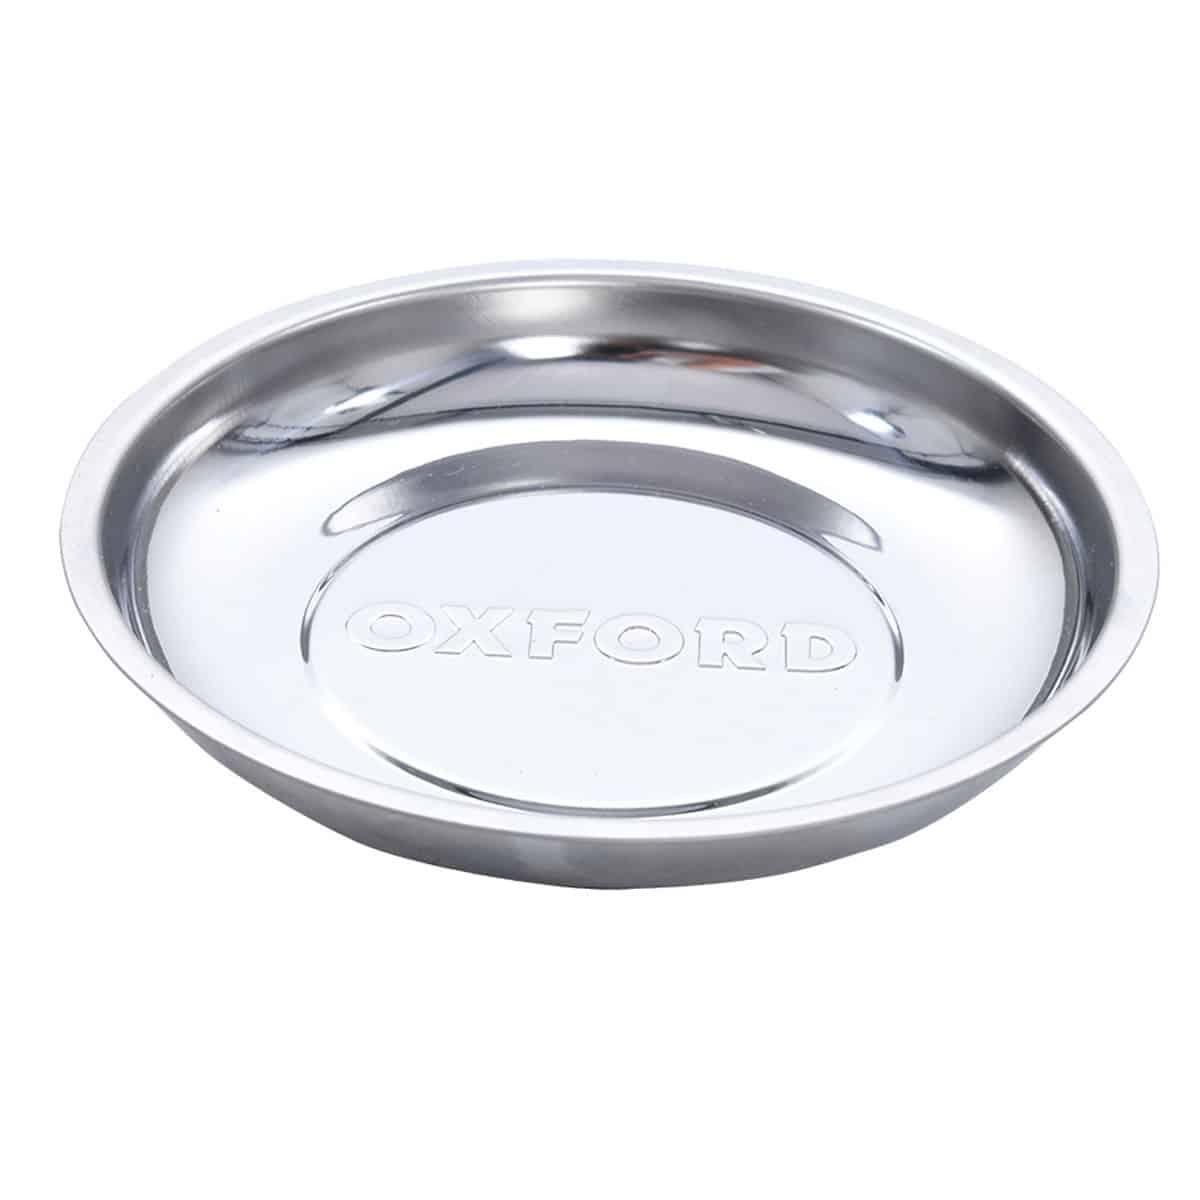 Oxford Magneto Magnetic Workshop Tray - 15cms - Browse our range of Care: Tools - getgearedshop 